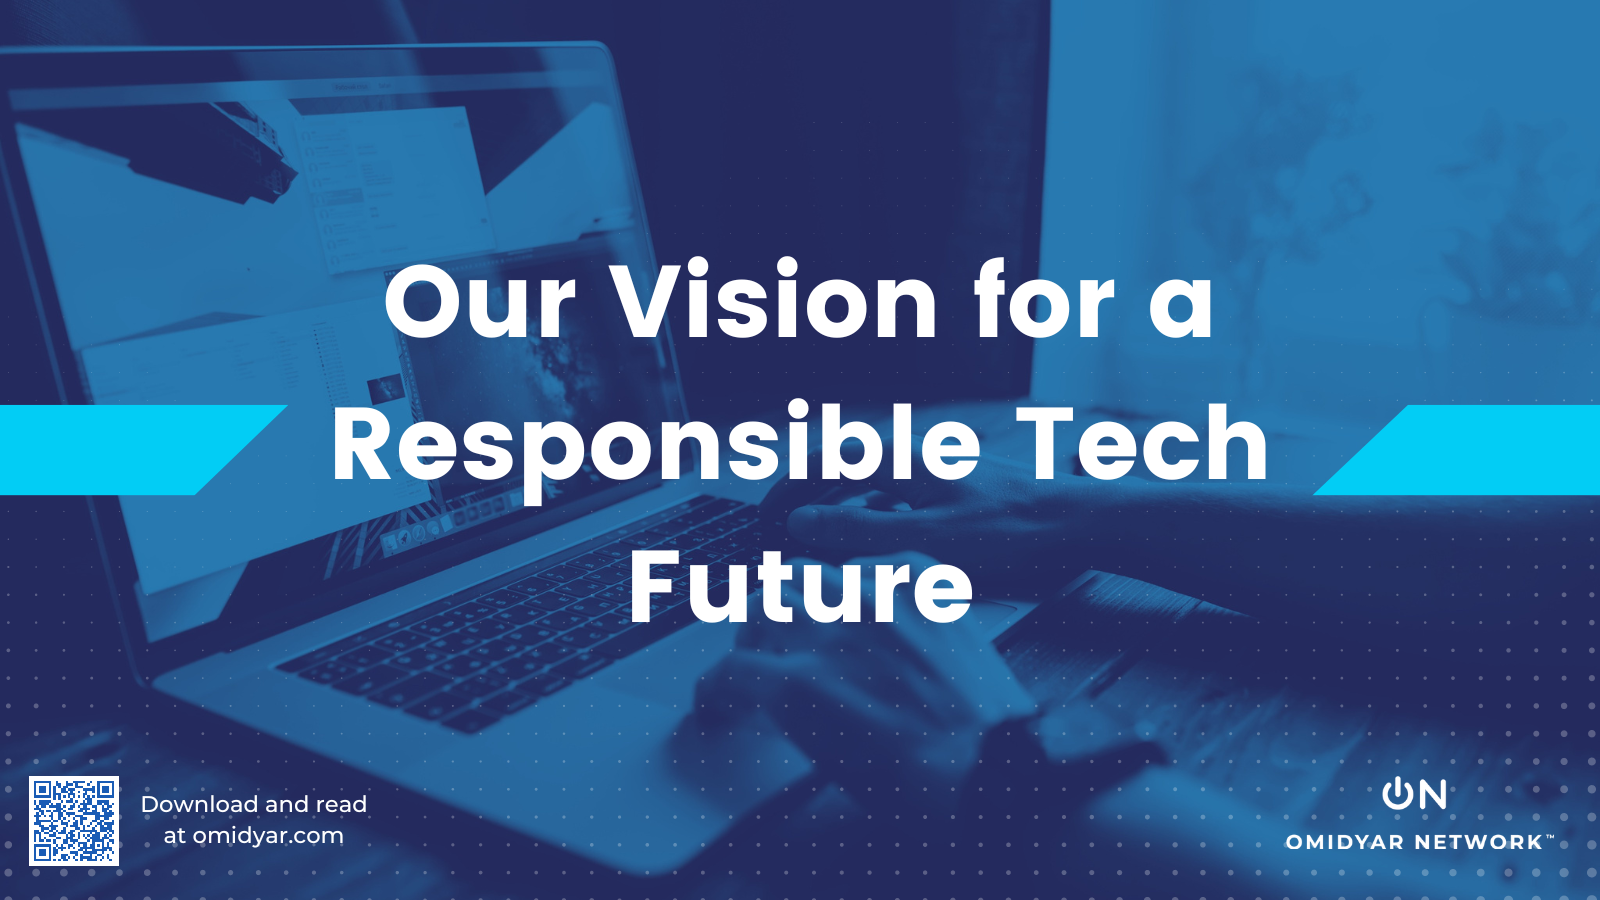 Our Vision for a Responsible Tech Future